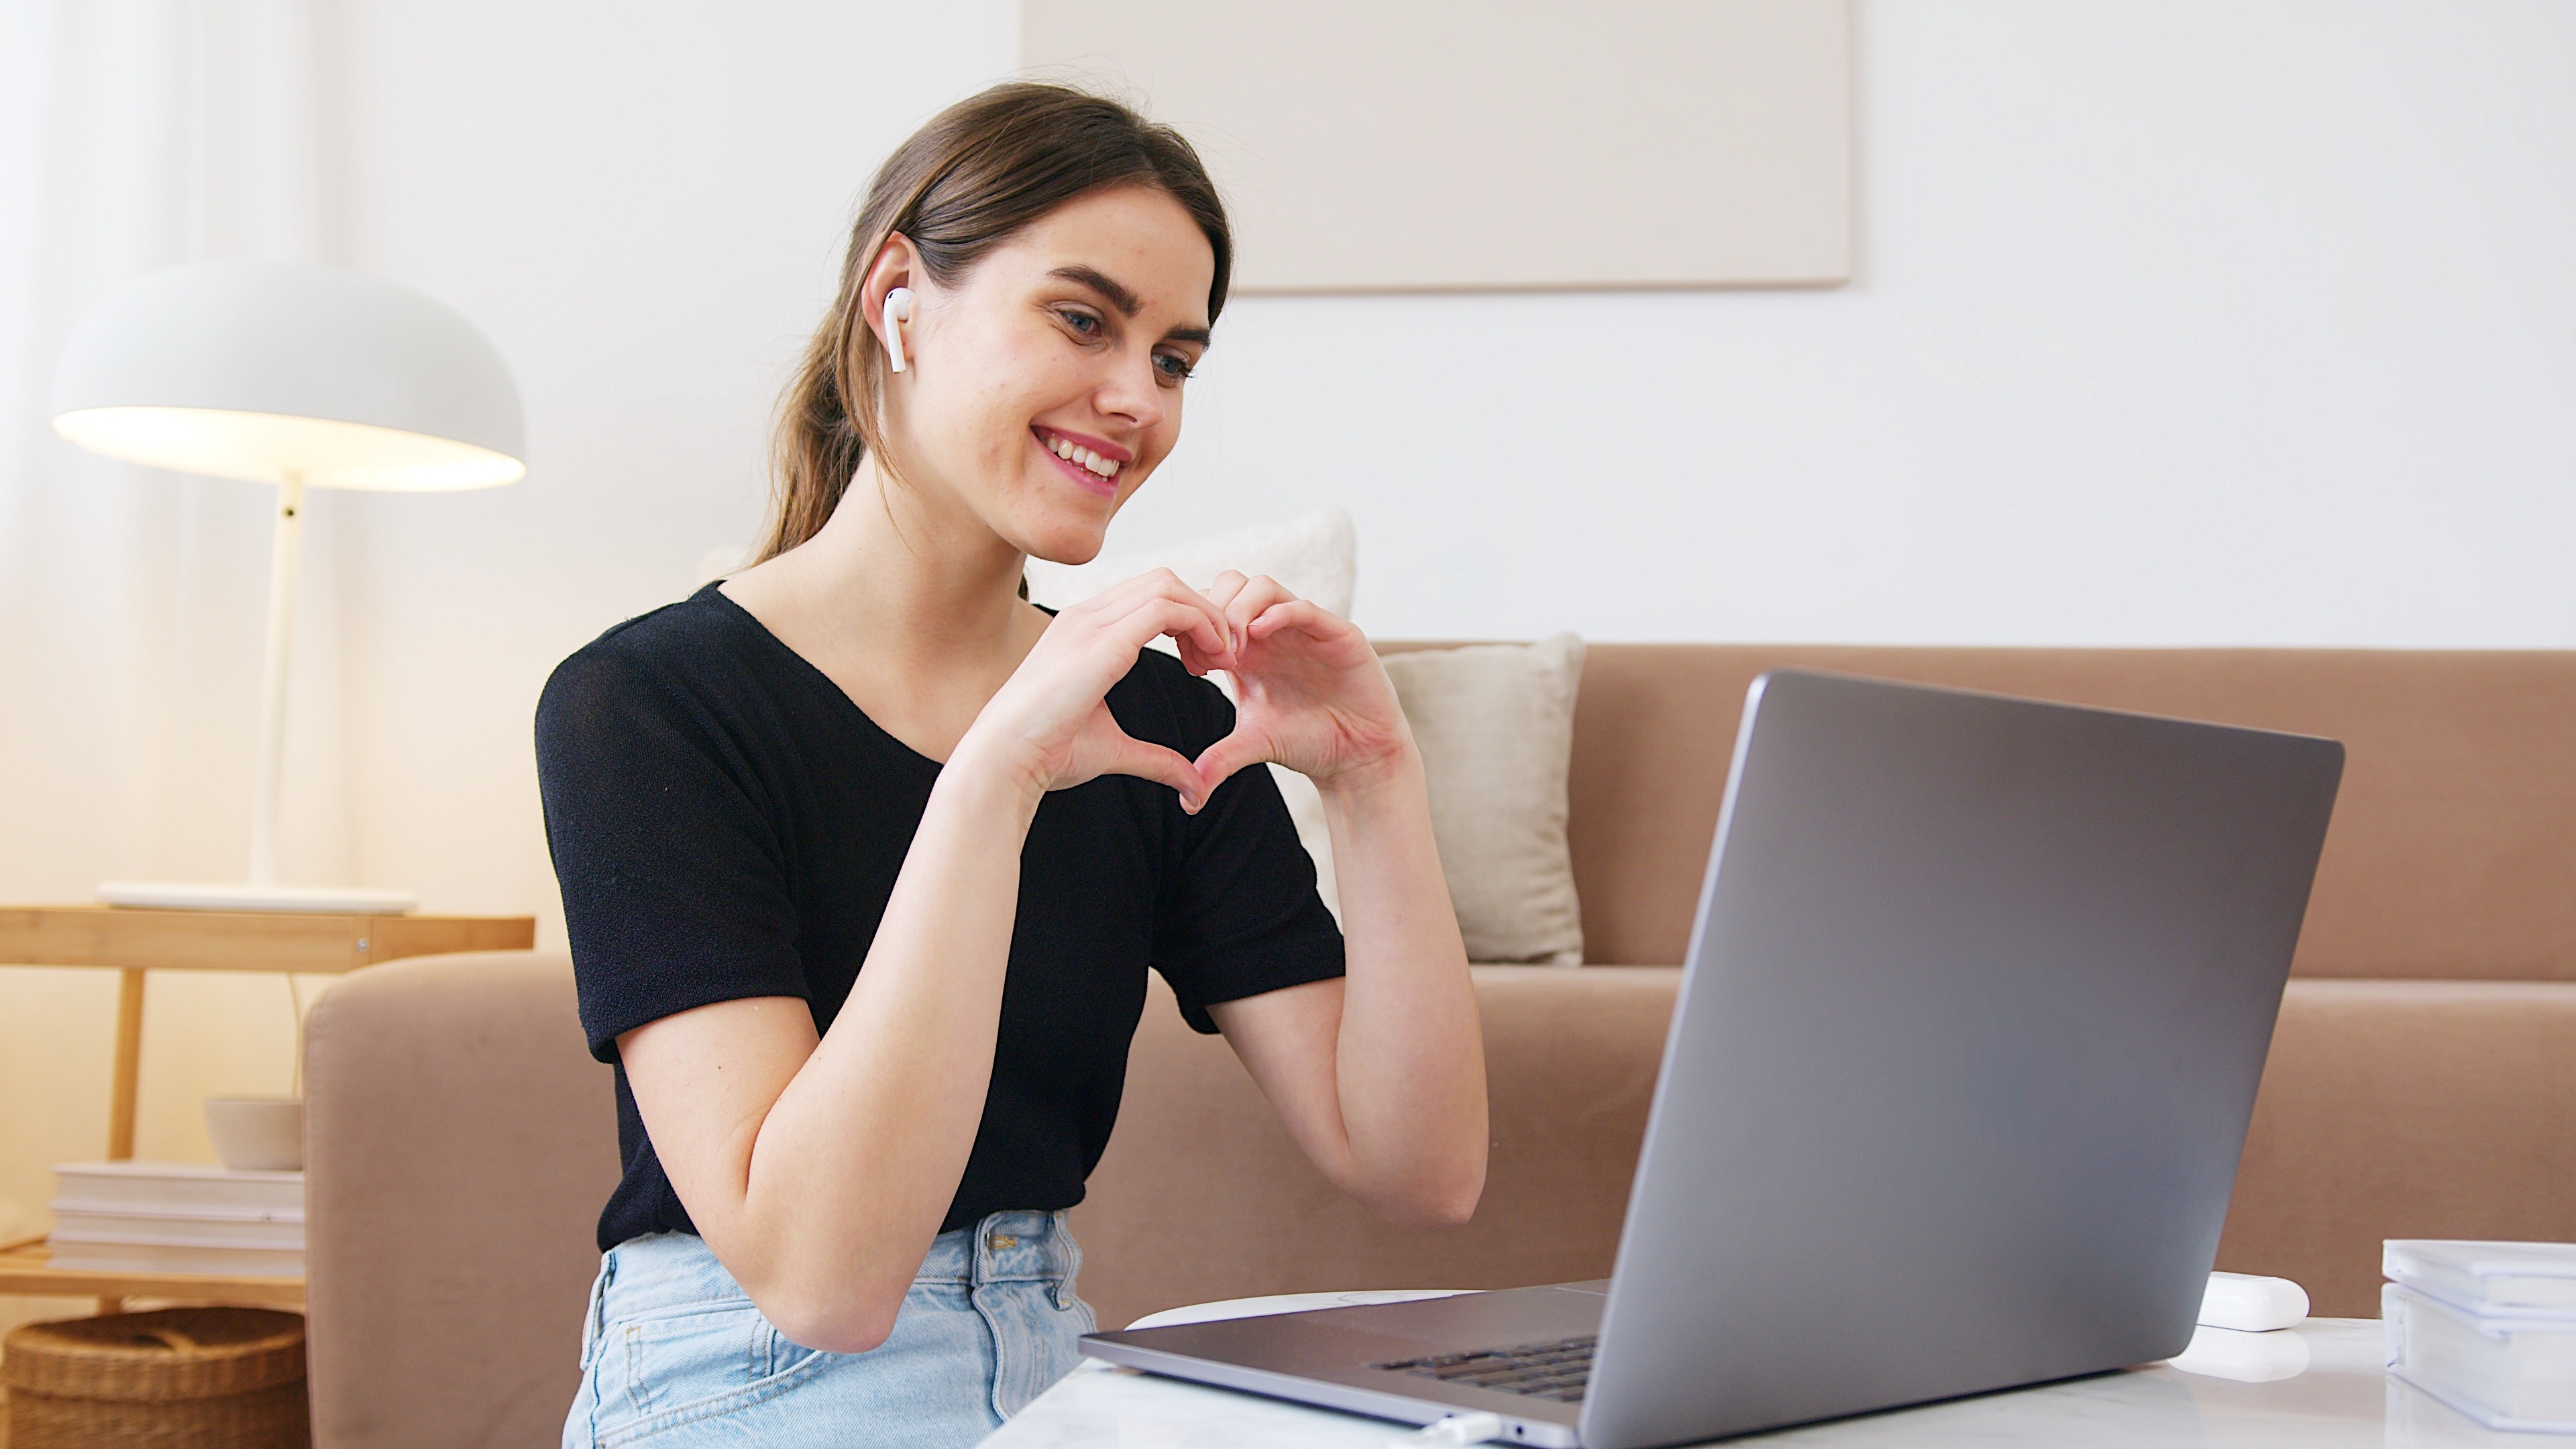 Woman makes a heart with hands while chatting online